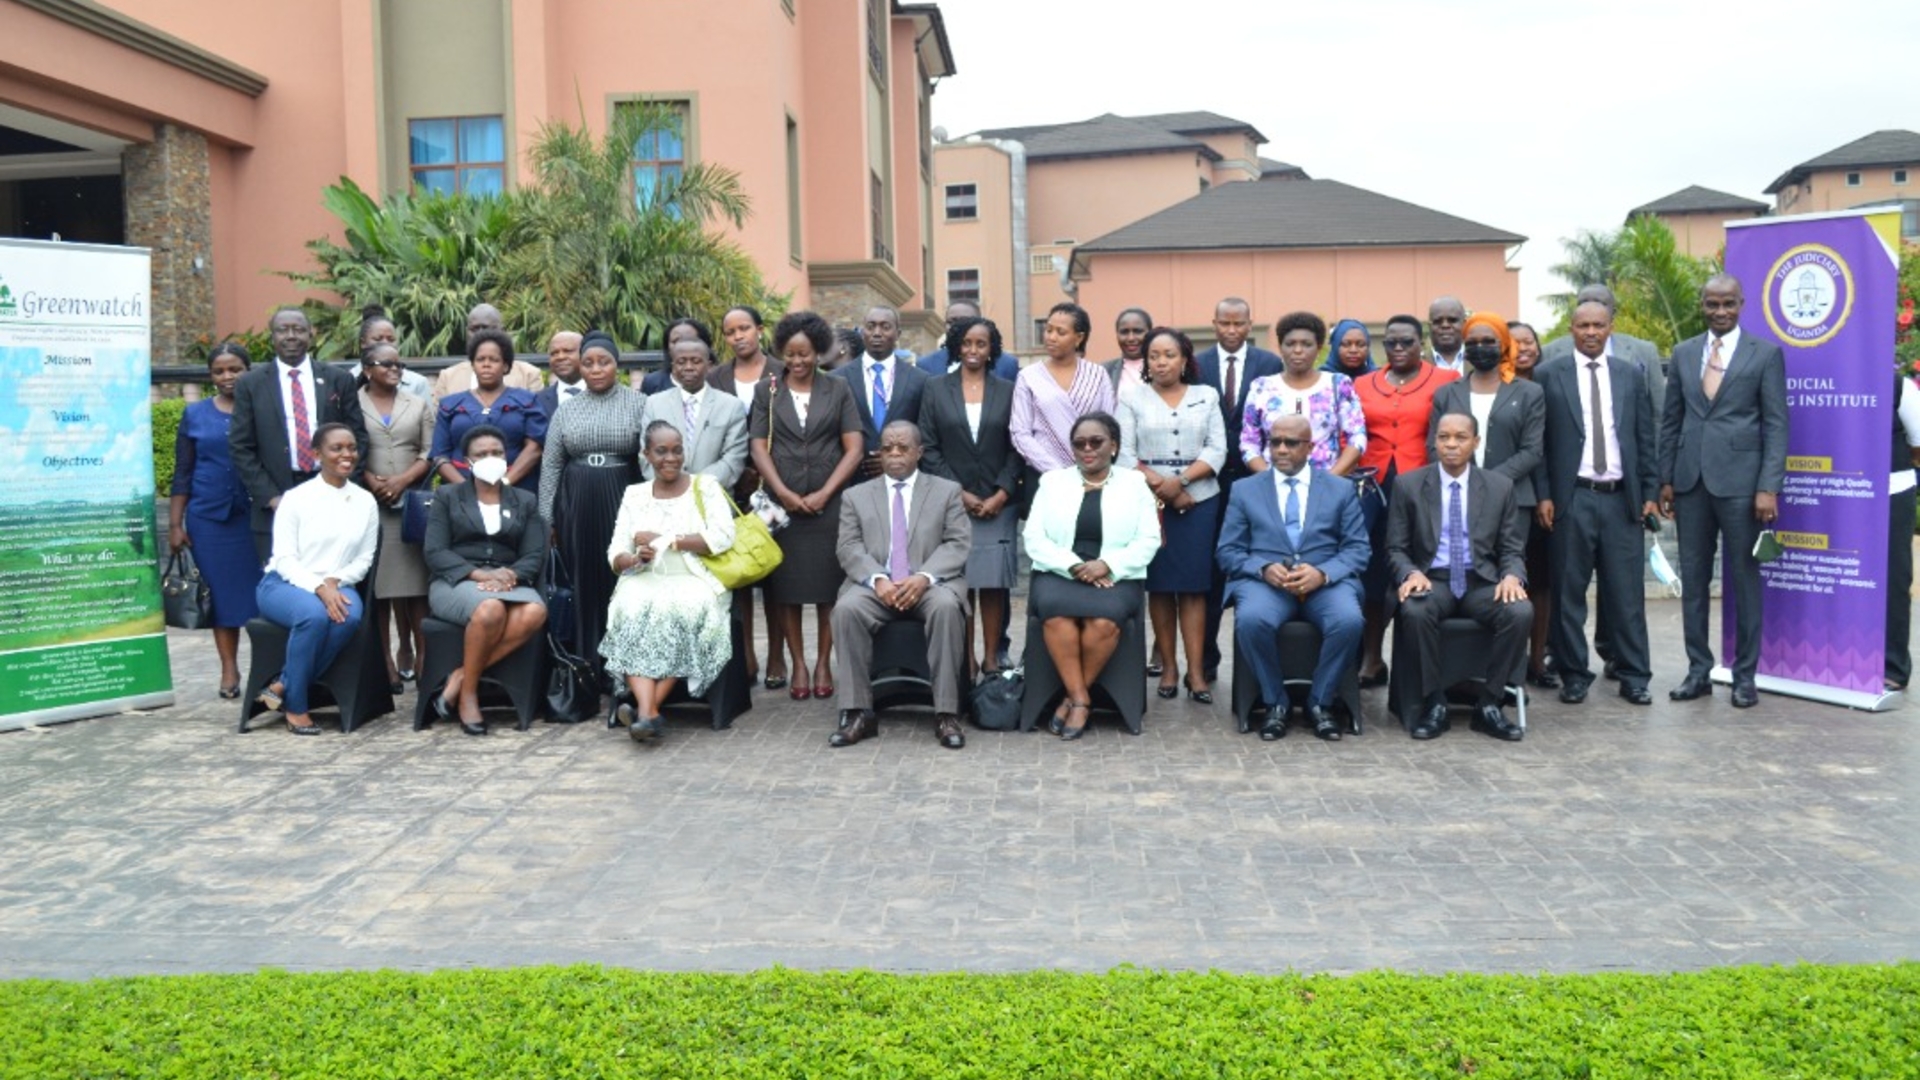 A group photo of Judicial Officers and the Director Greenwatch at Mestil hotel and residences, Kampala